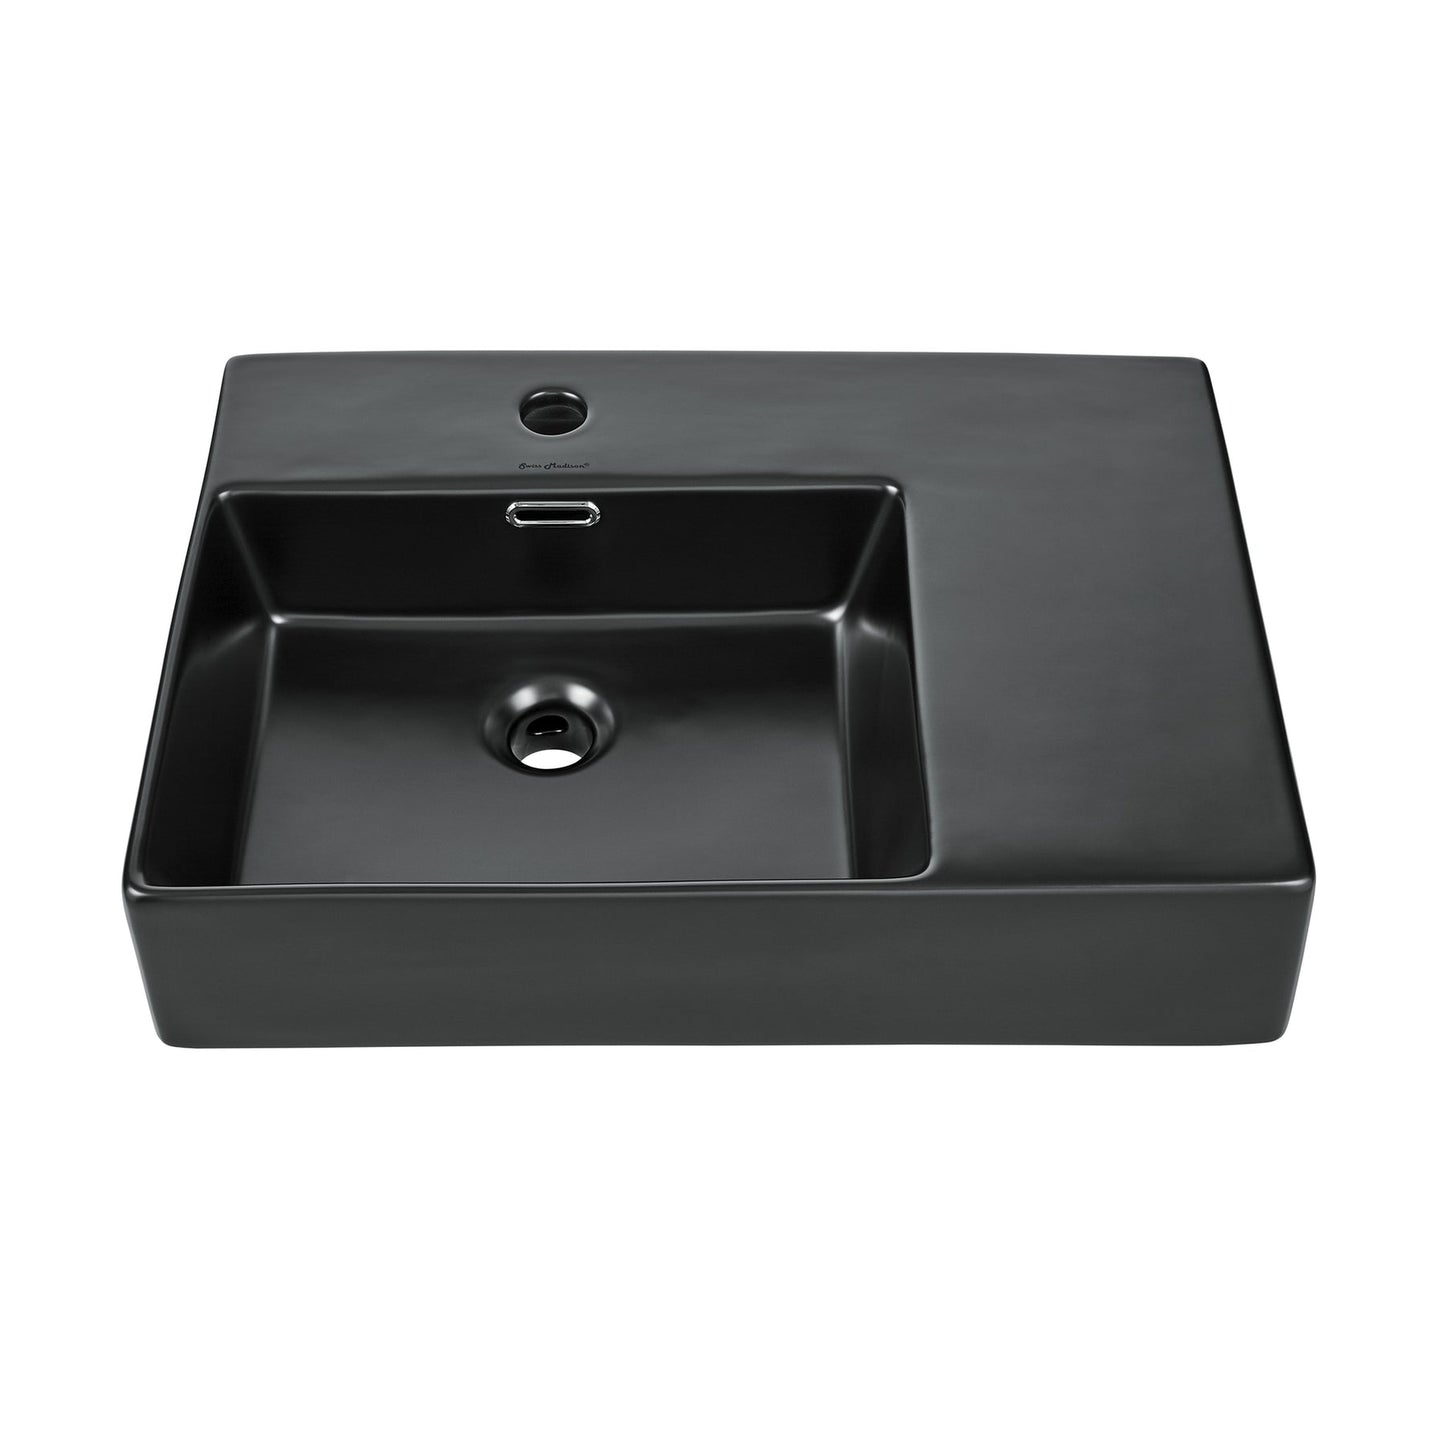 Swiss Madison St. Tropez 24" x 17" Rectangular Matte Black Ceramic Wall-Hung Bathroom Sink With Left Side Single Hole Faucet